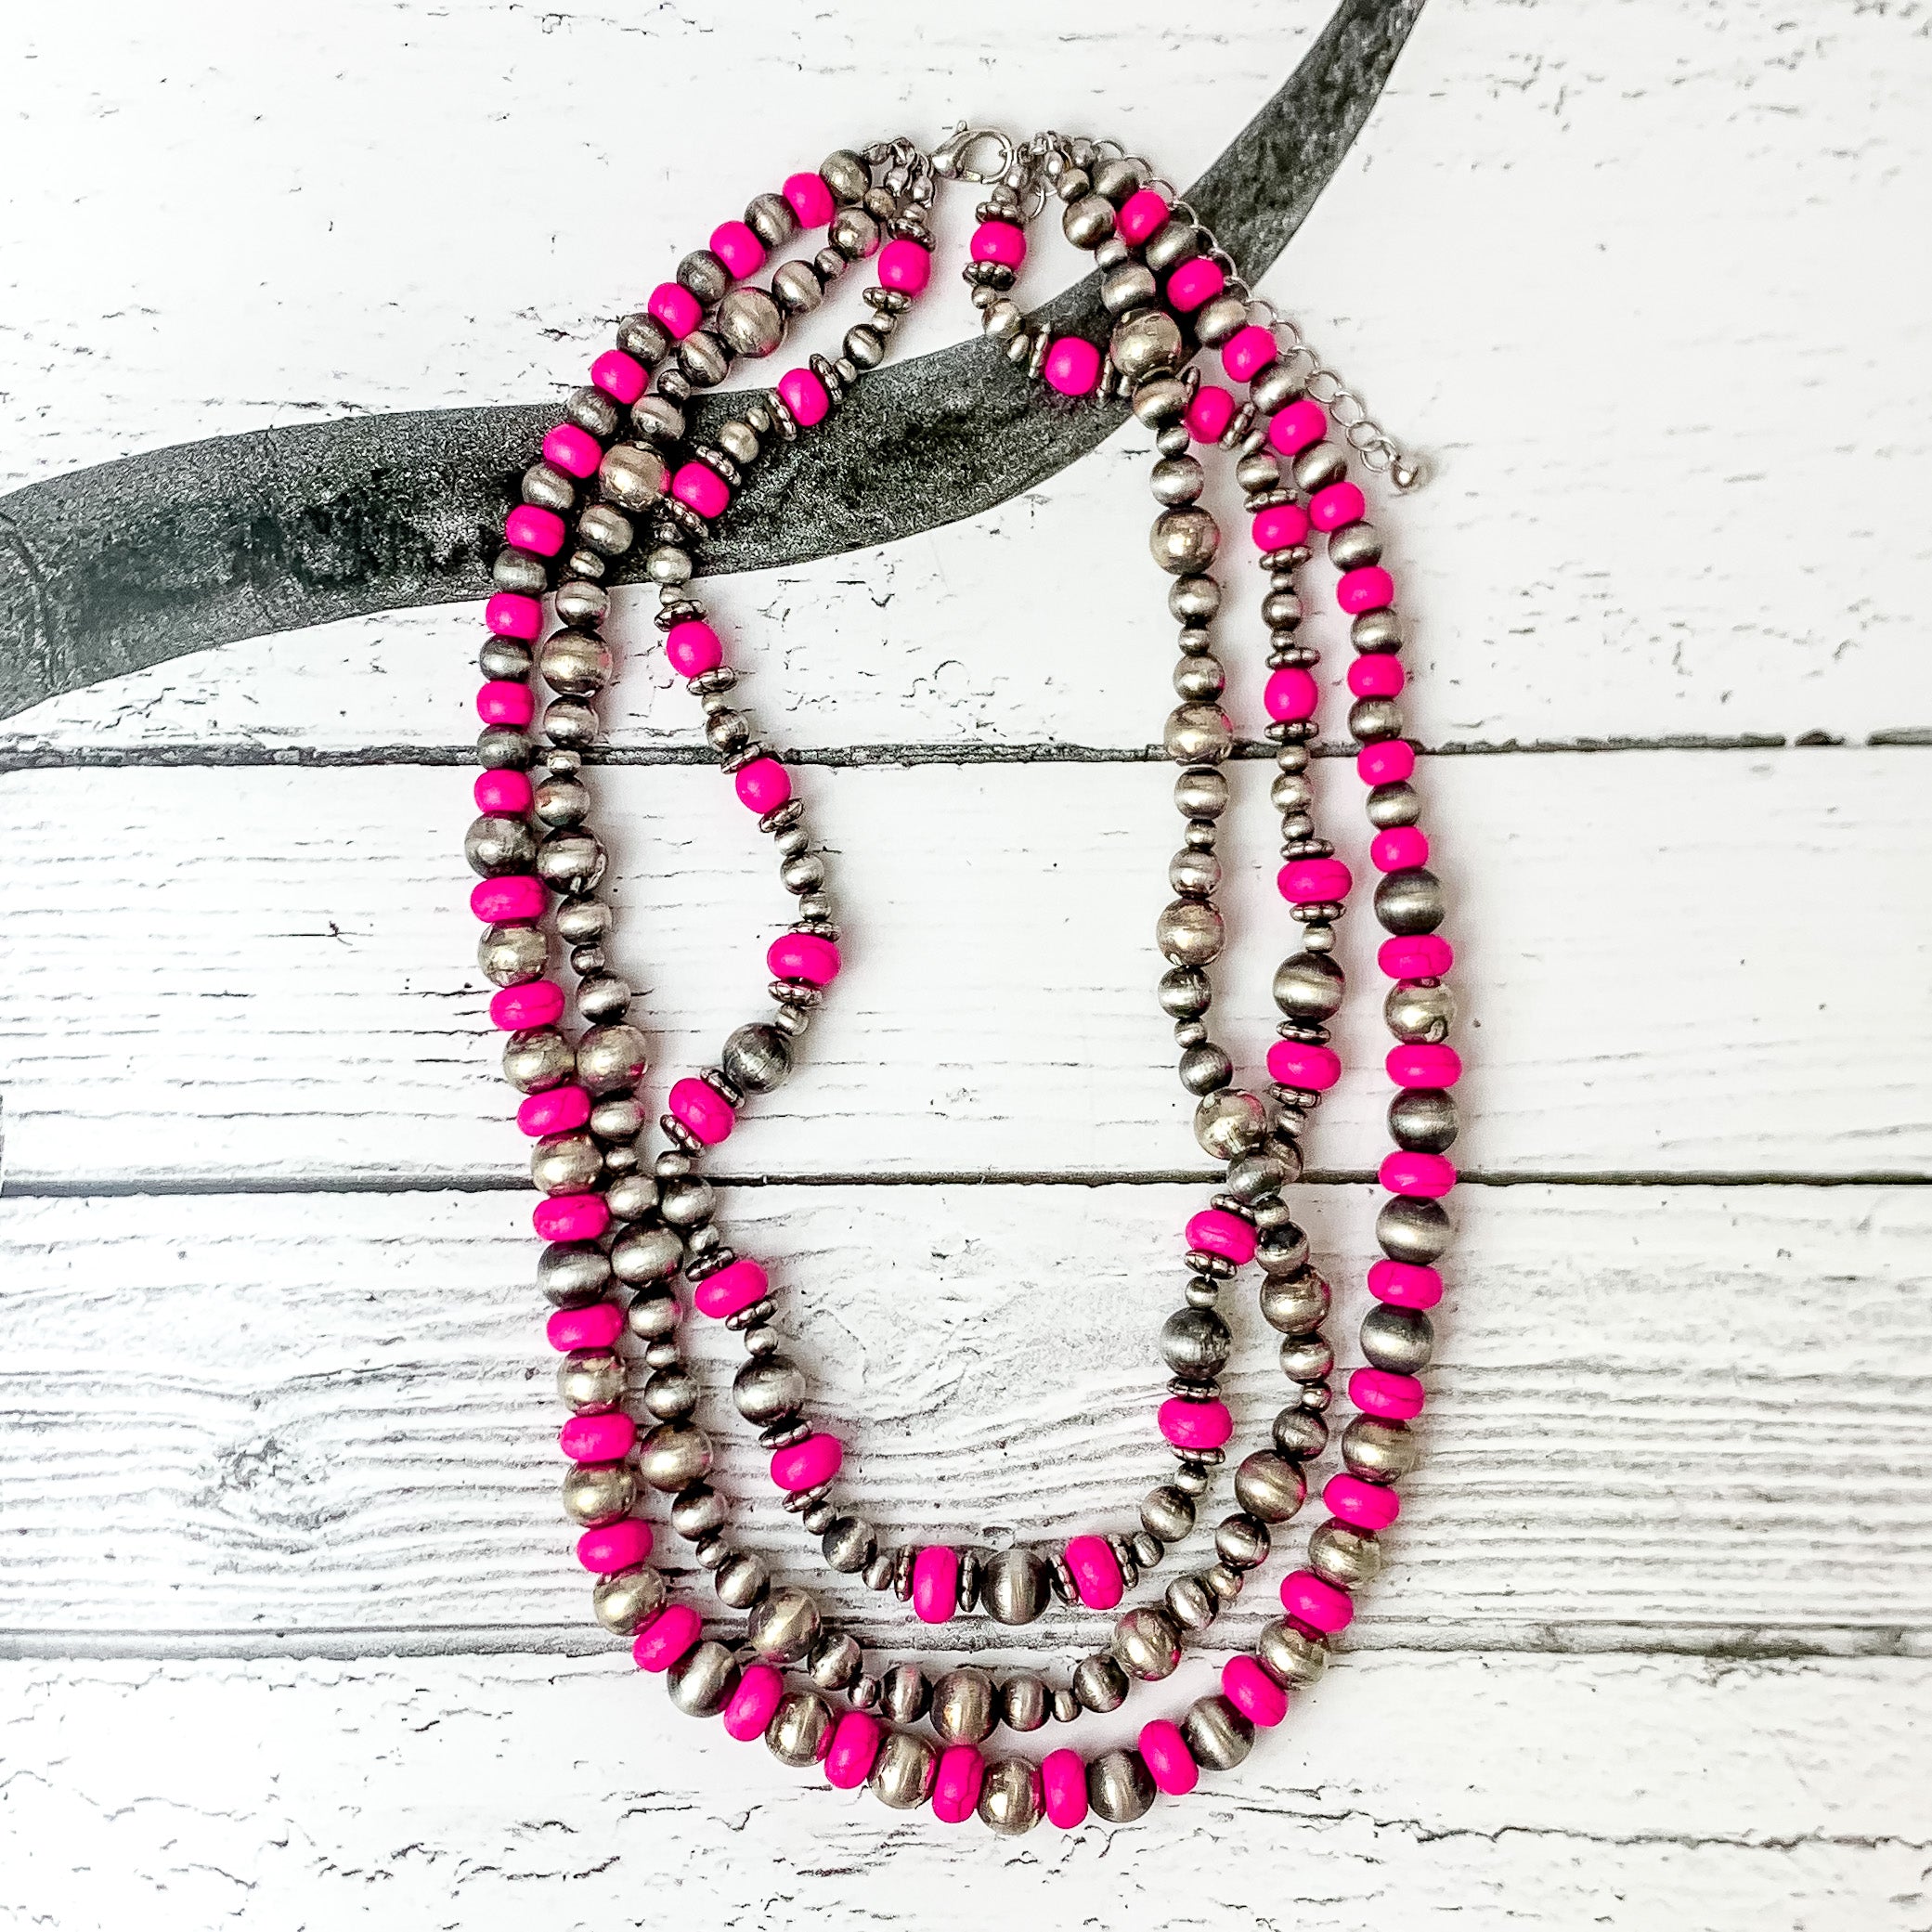 This necklace comes with three strands of beads. Two of them are mixed with fuchsia and faux navajo pearls in silver. The other strand is just faux navajo pearls in silver. Pictured on a black and white western photo in the background.